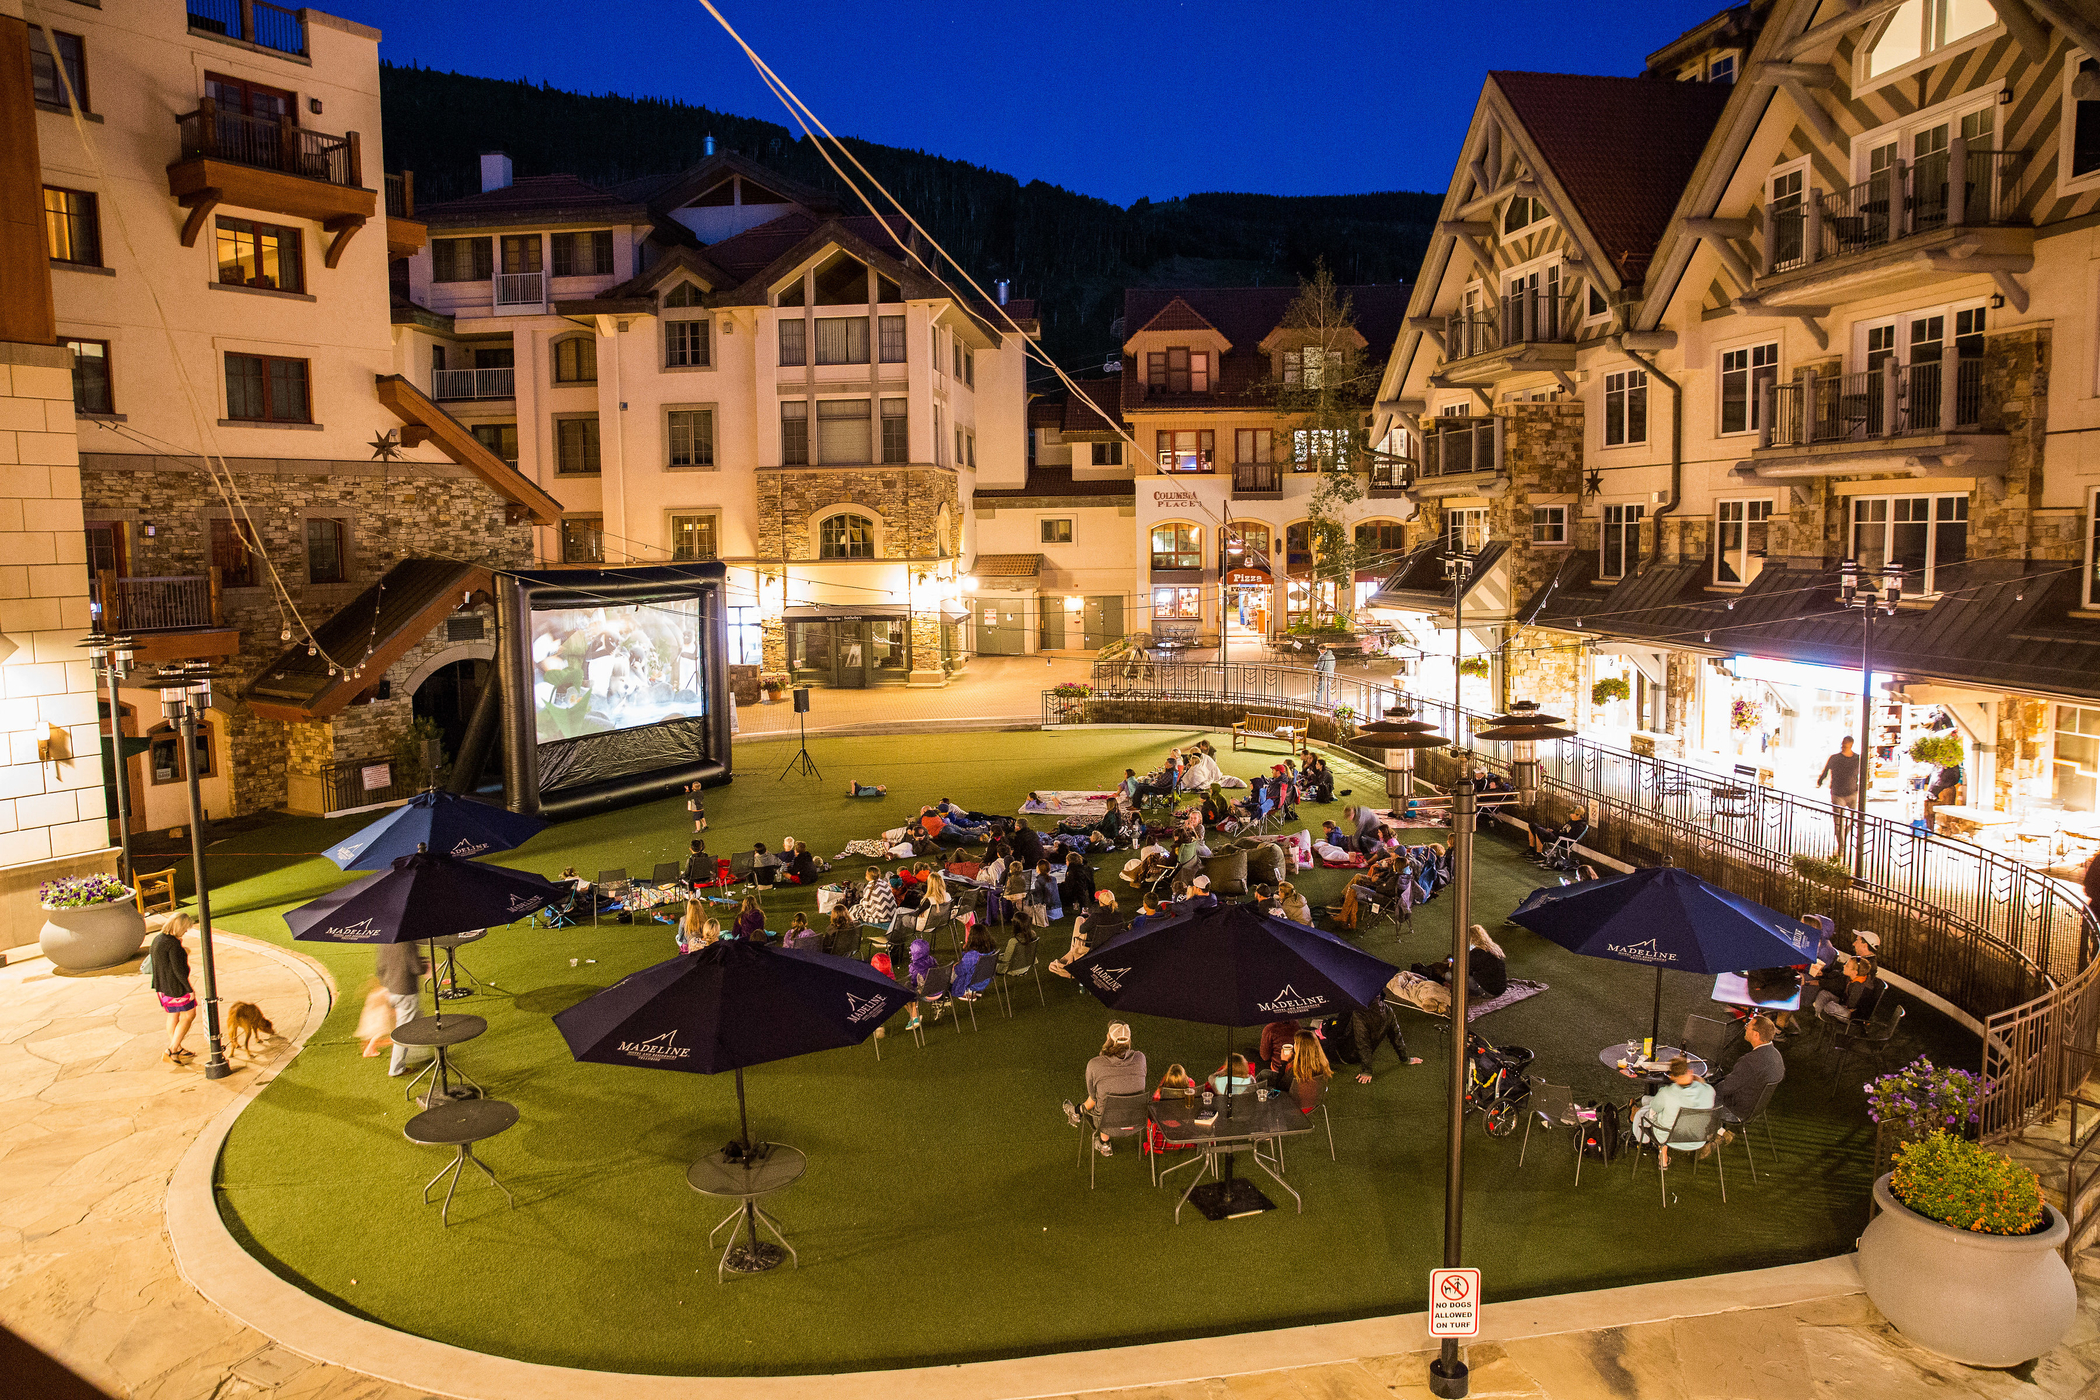 MOVIES UNDER THE STARS: Field of Dreams — Telluride Arts District